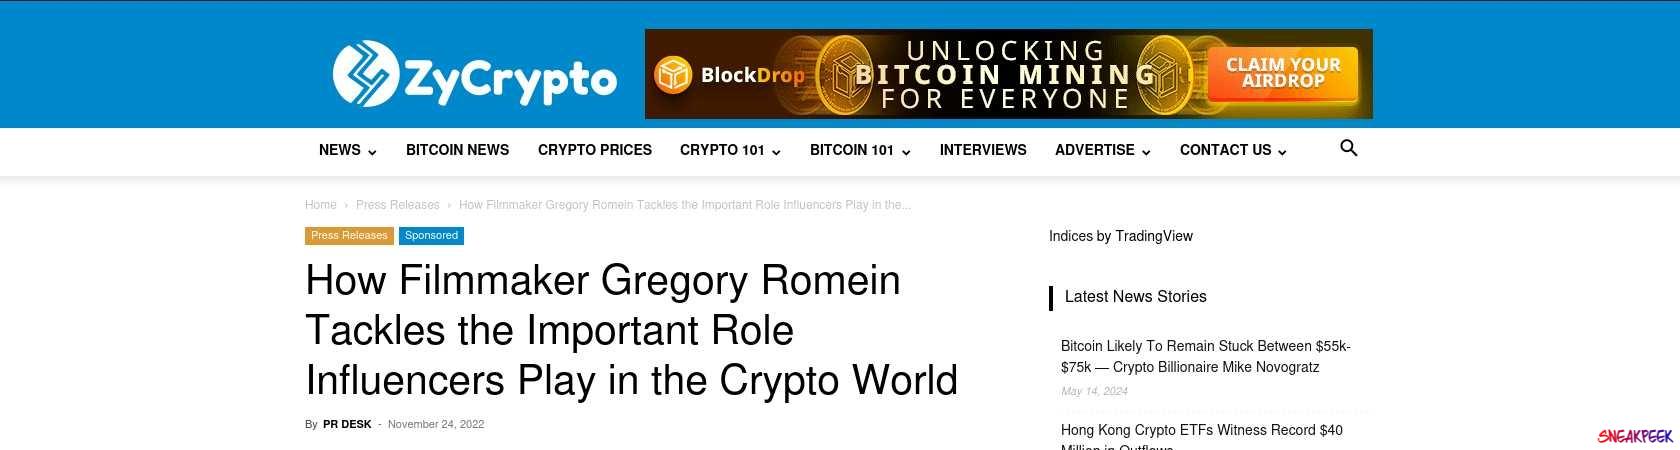 Read the full Article:  ⭲ How Filmmaker Gregory Romein Tackles the Important Role Influencers Play in the Crypto World